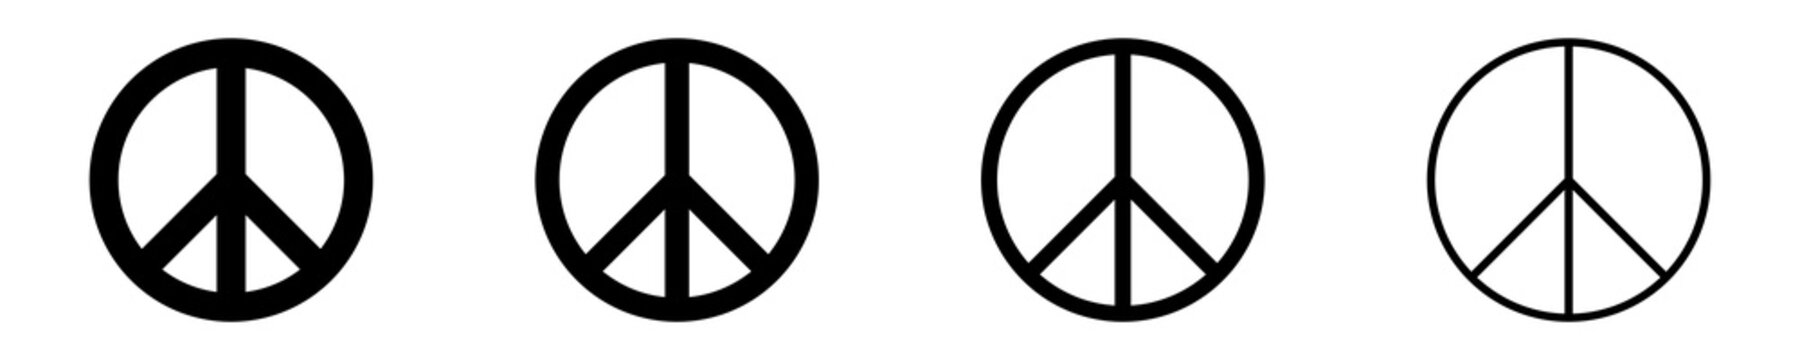 Set of Peace symbols vector icons on white background. World peace sign. Vector 10 EPS.